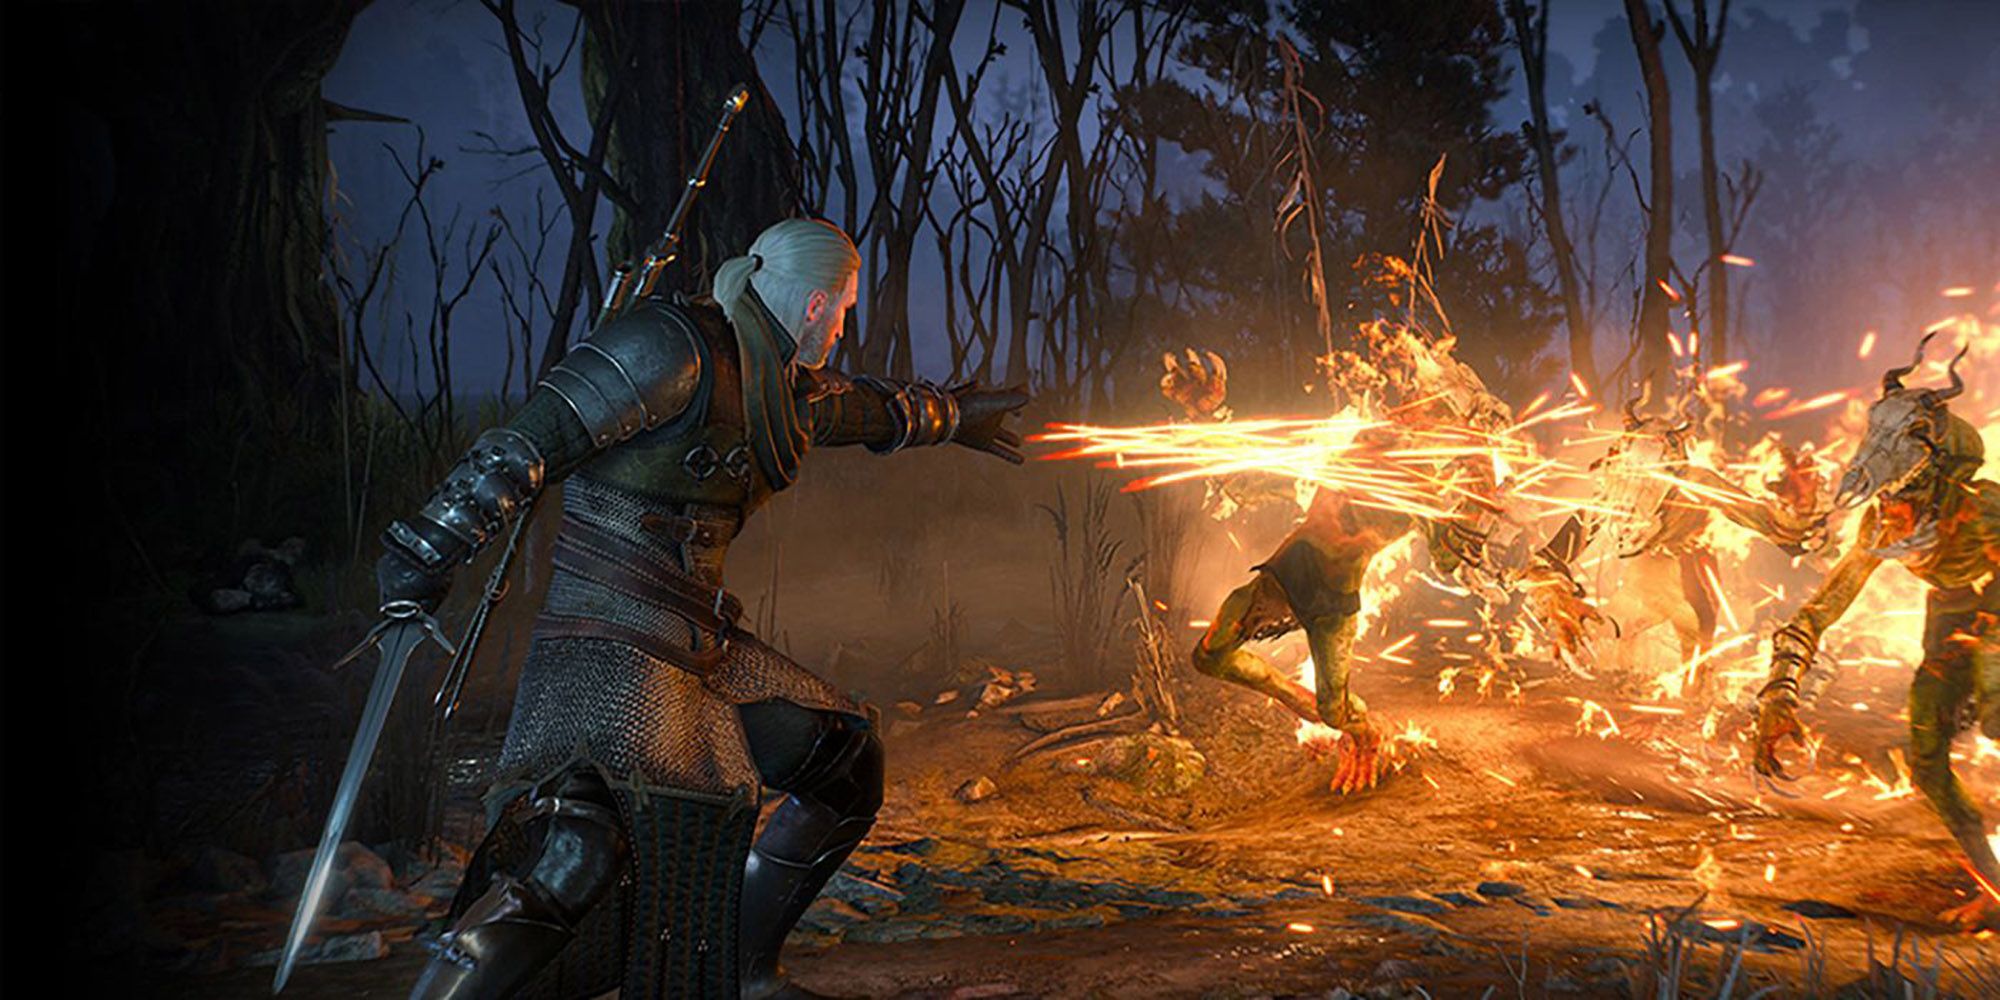 Witcher 3 - Geralt Burning A Group Of Enemies With Firestream